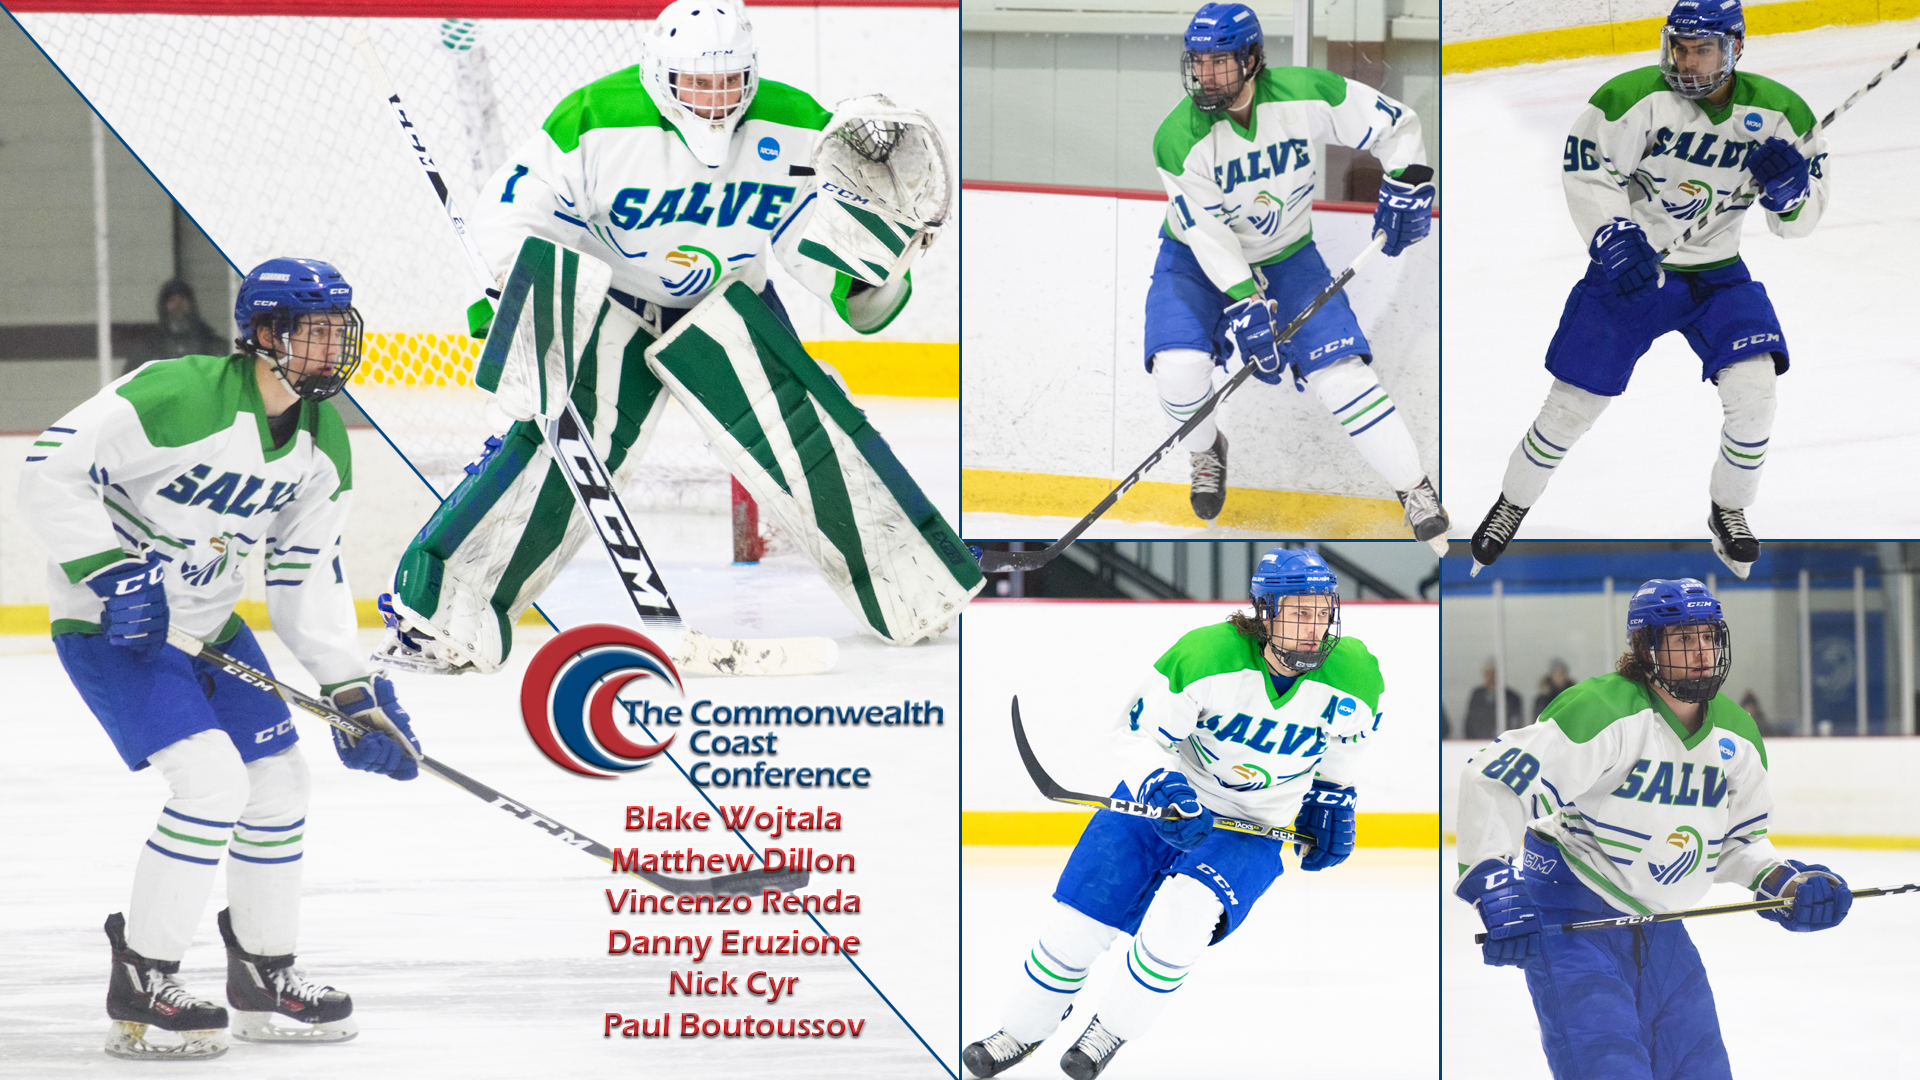 Blake Wojtala and Matthew Dillon took home major wards while Vincenzo Renda, Danny Eruzione, Nick Cyr, and Paul Boutoussov were all named to the All-CCC team.